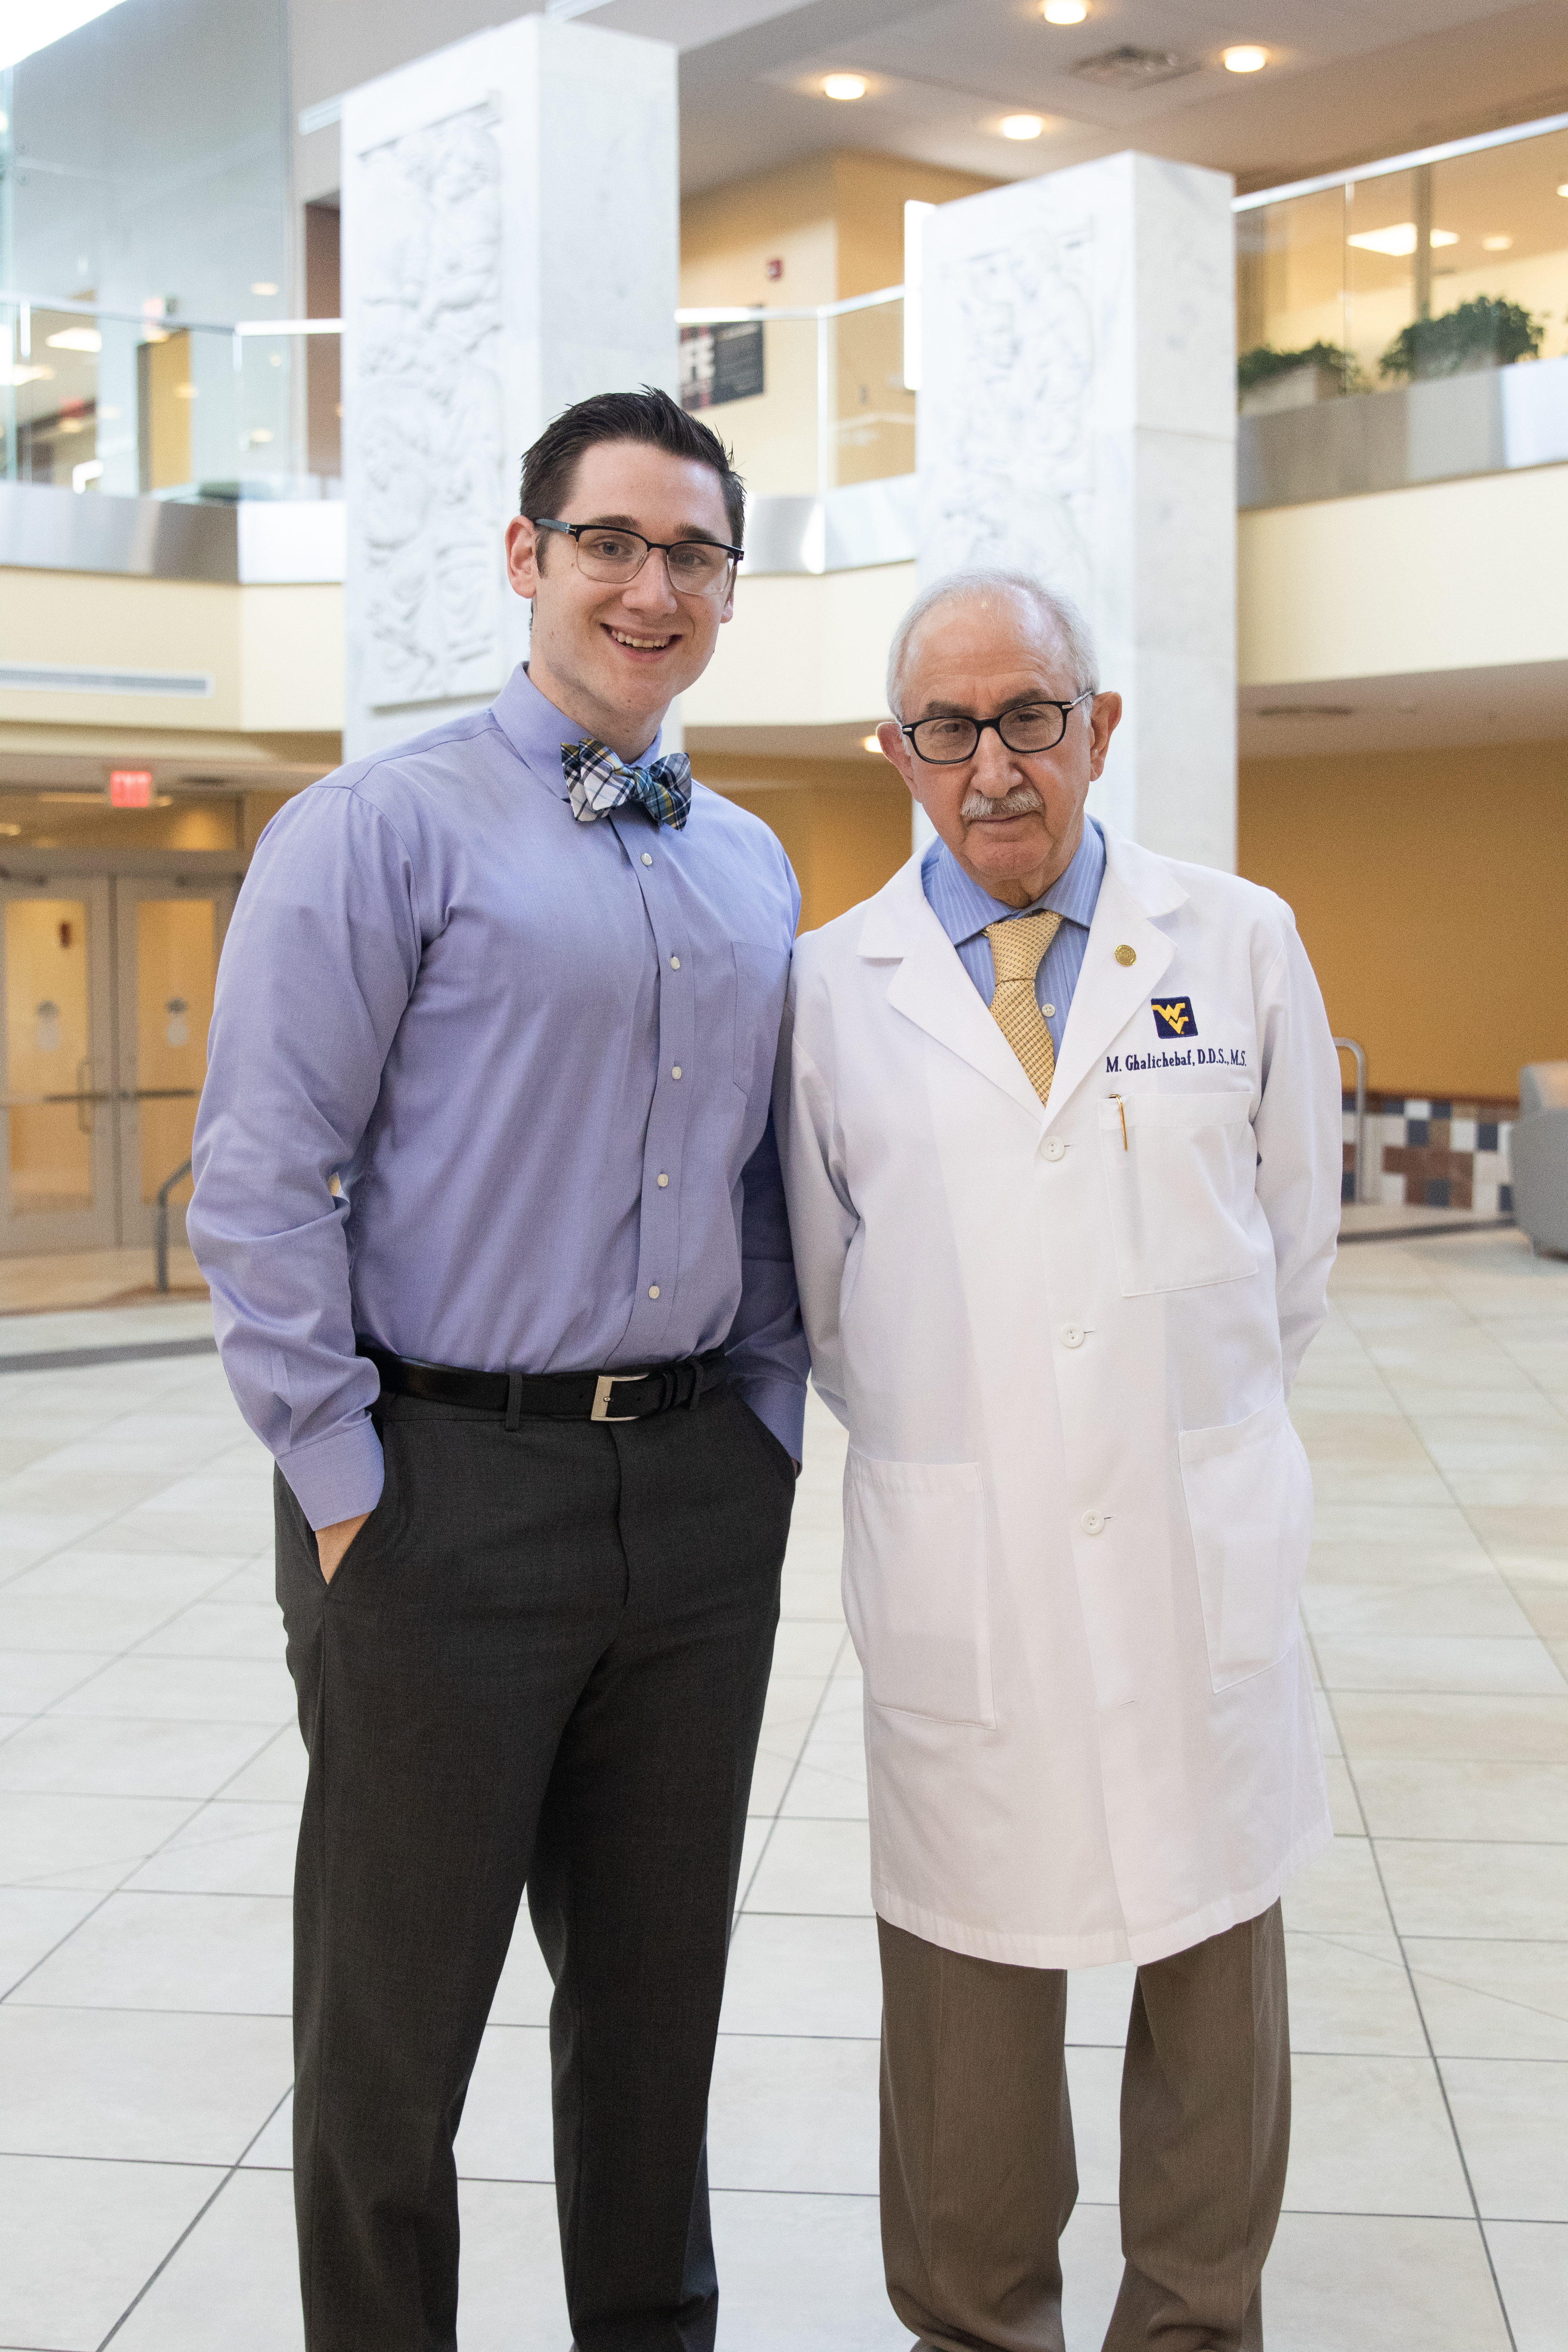 Dr. Harper and Dr. Ghalichebaf pose in the Health Sciences Center.